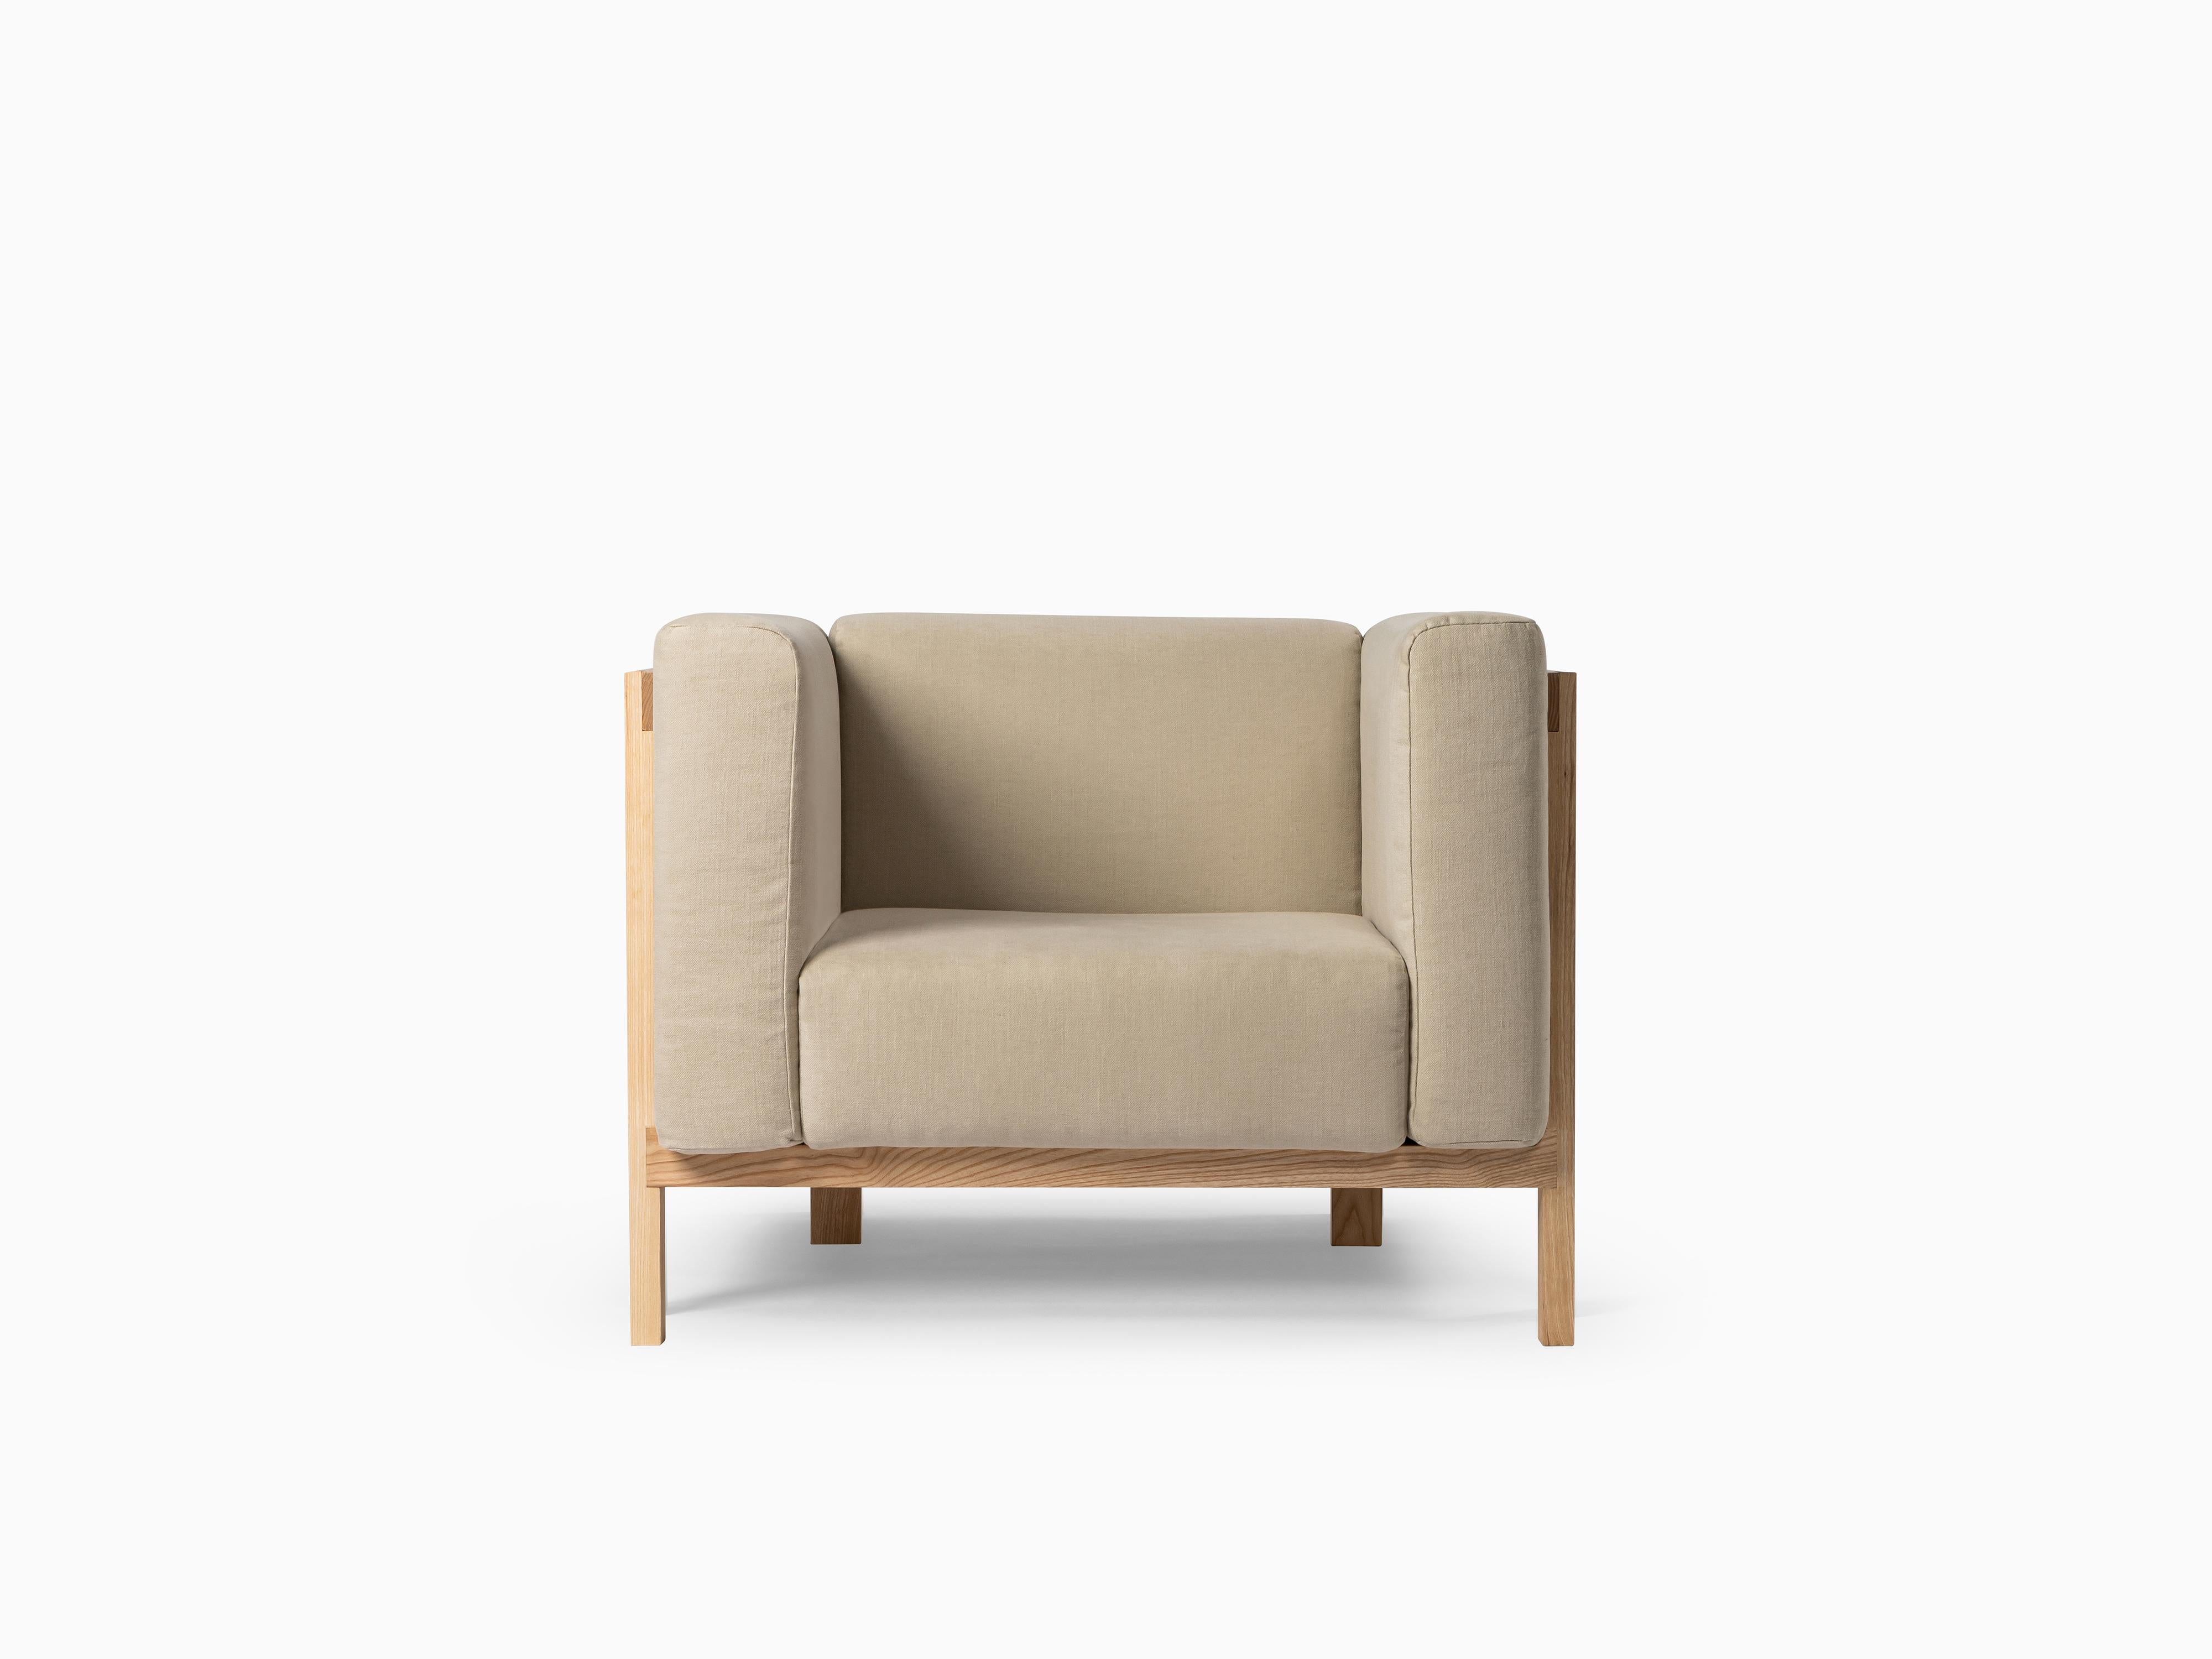 Portuguese Minimalist one seater sofa ash - fabric upholstered For Sale